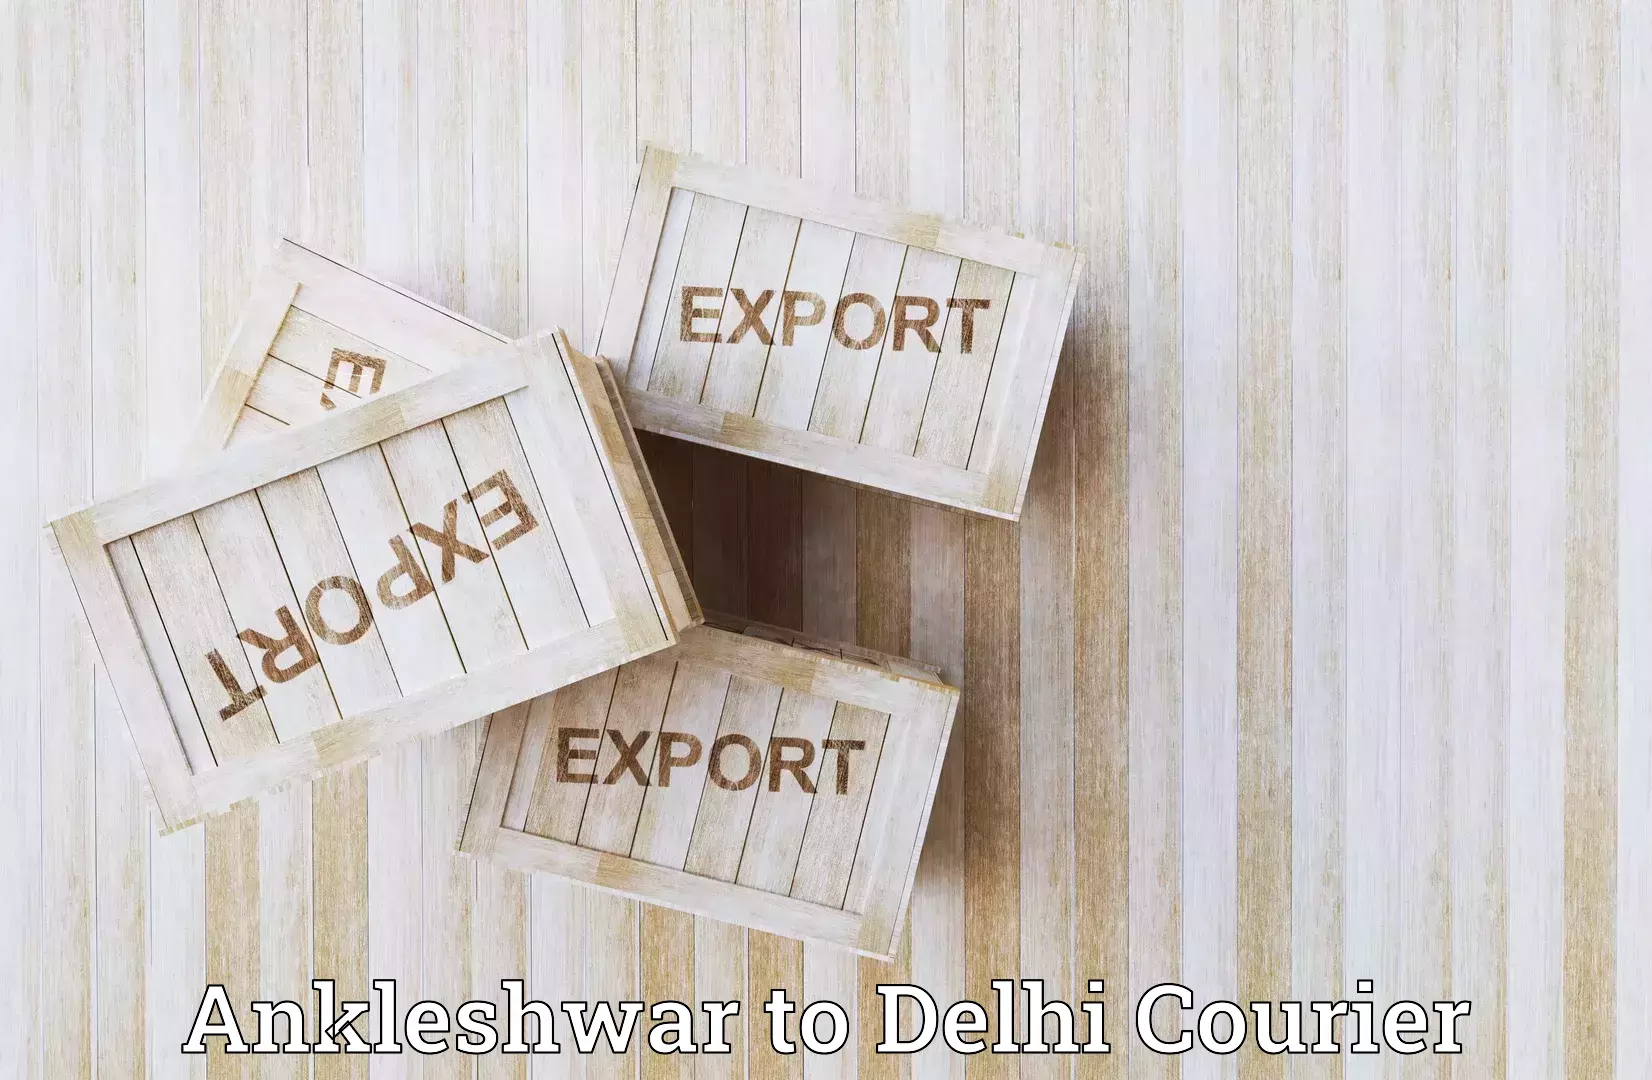 Express courier facilities in Ankleshwar to Jawaharlal Nehru University New Delhi